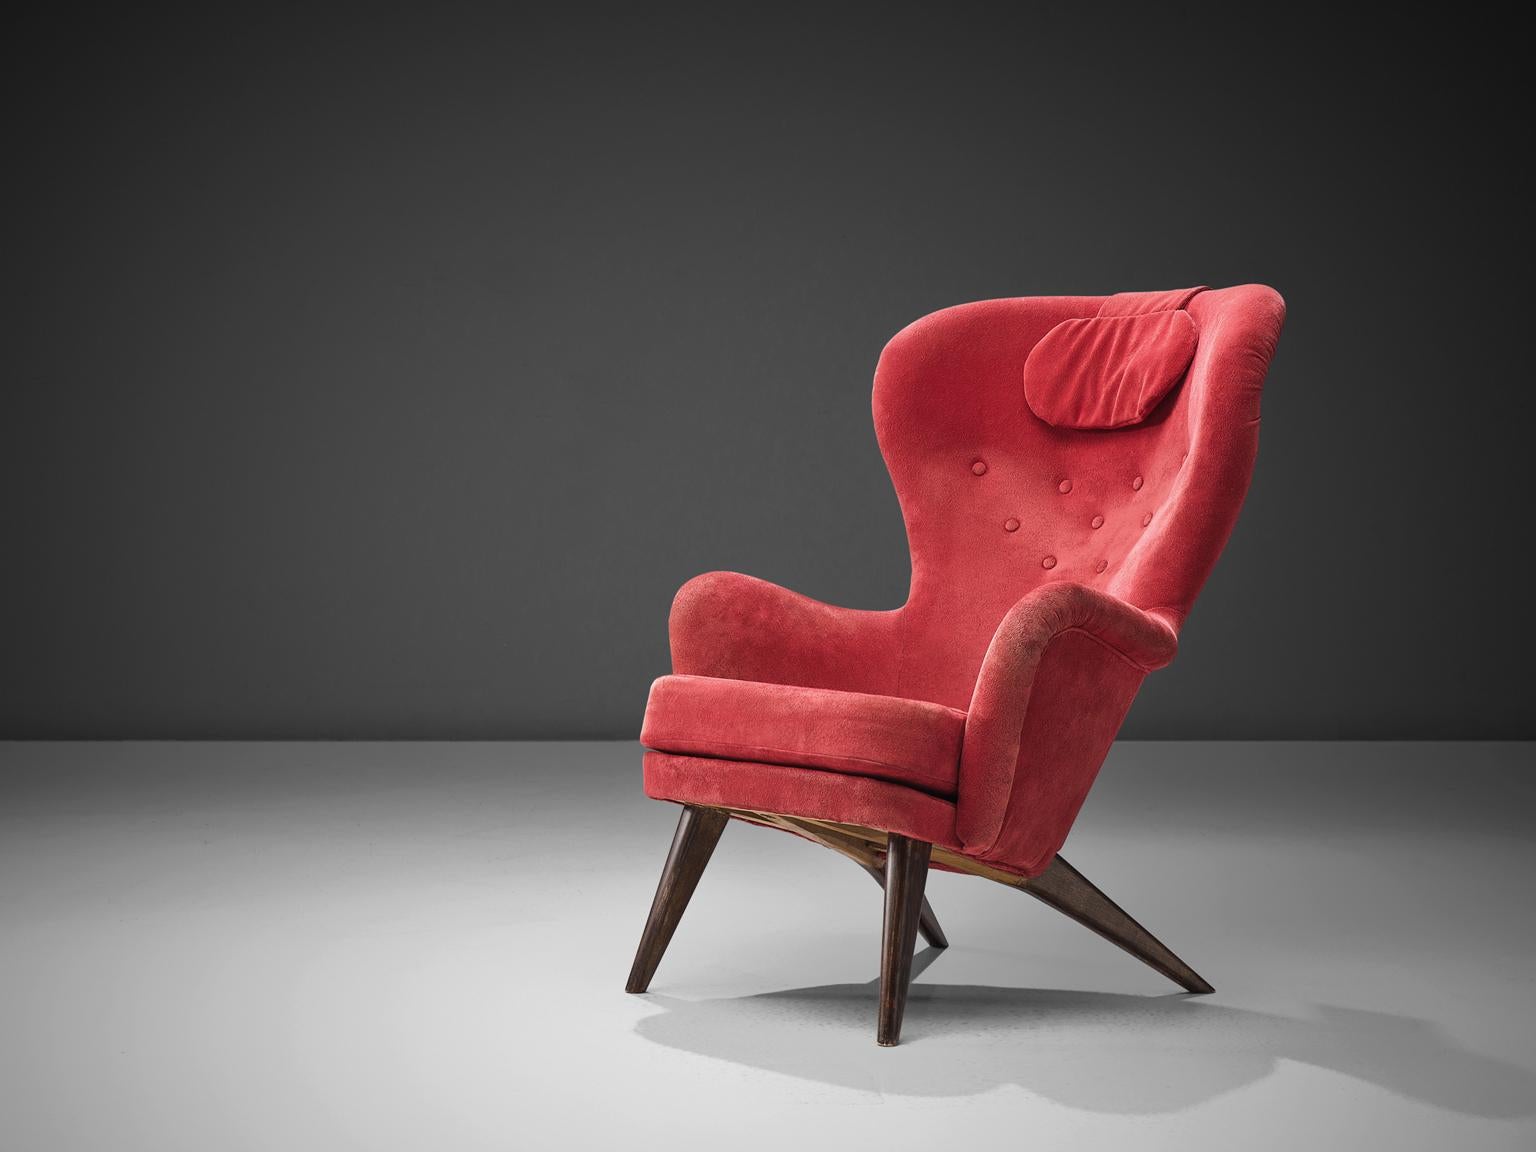 Carl Gustaf Hiort for Puunveisto Oy - Träsnideri Ab, 'Siesta' lounge chair, red fabric, oak, Finland, design 1952, production later.

This sensuous armchair has a curved, slender seat with a slightly winged back. The chair leans slightly backwards